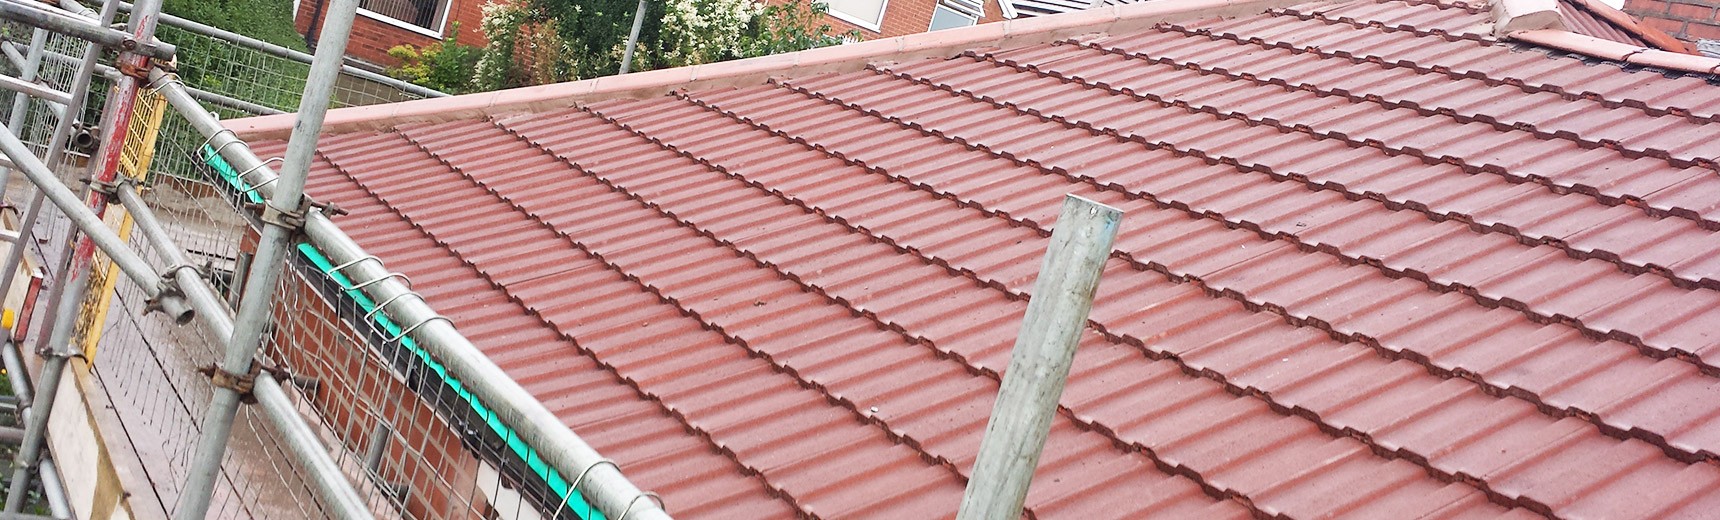 Laying down clay roof tiles